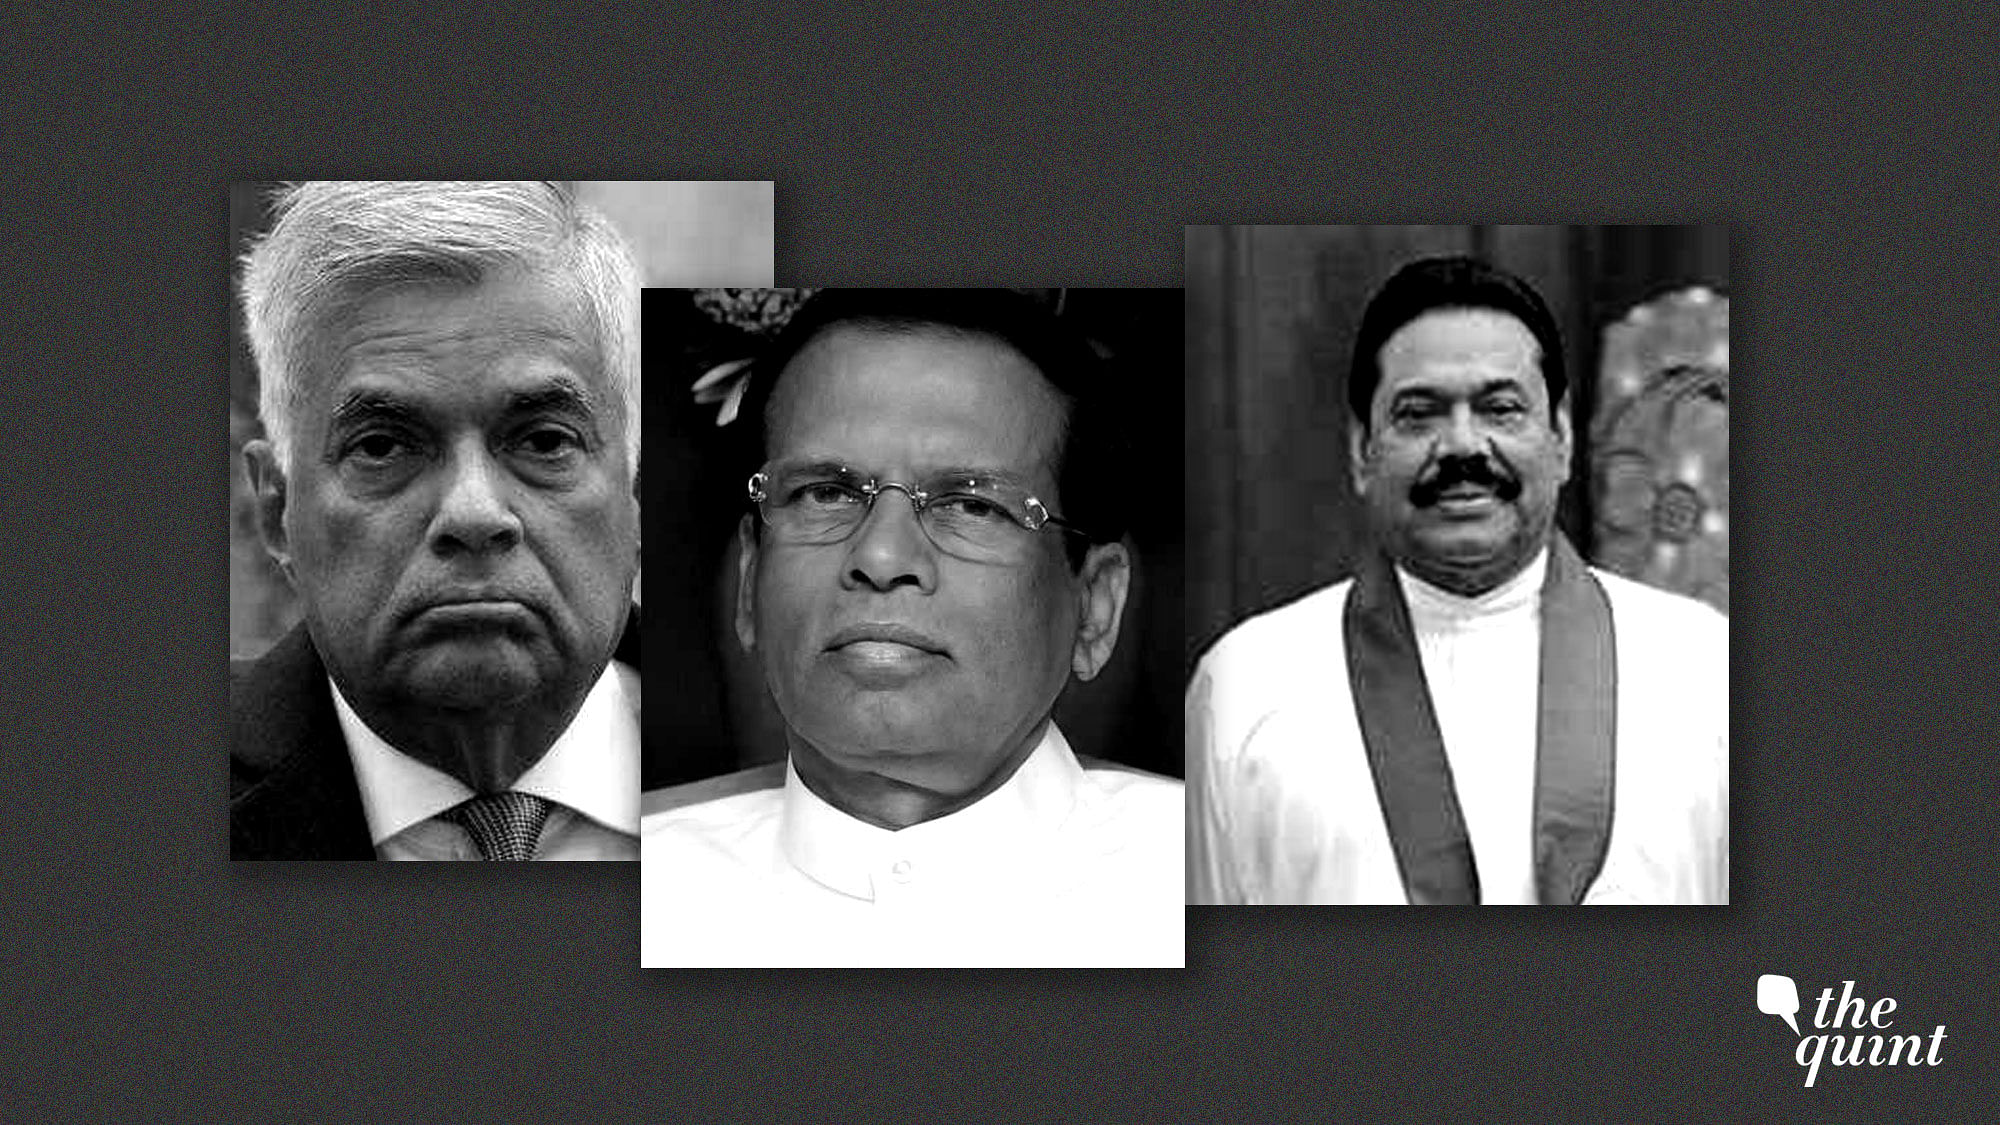 The collapse of Sri Lanka’s first-ever coalition government, and the events that unfolded after 26 October, has triggered political turmoil in the nation.